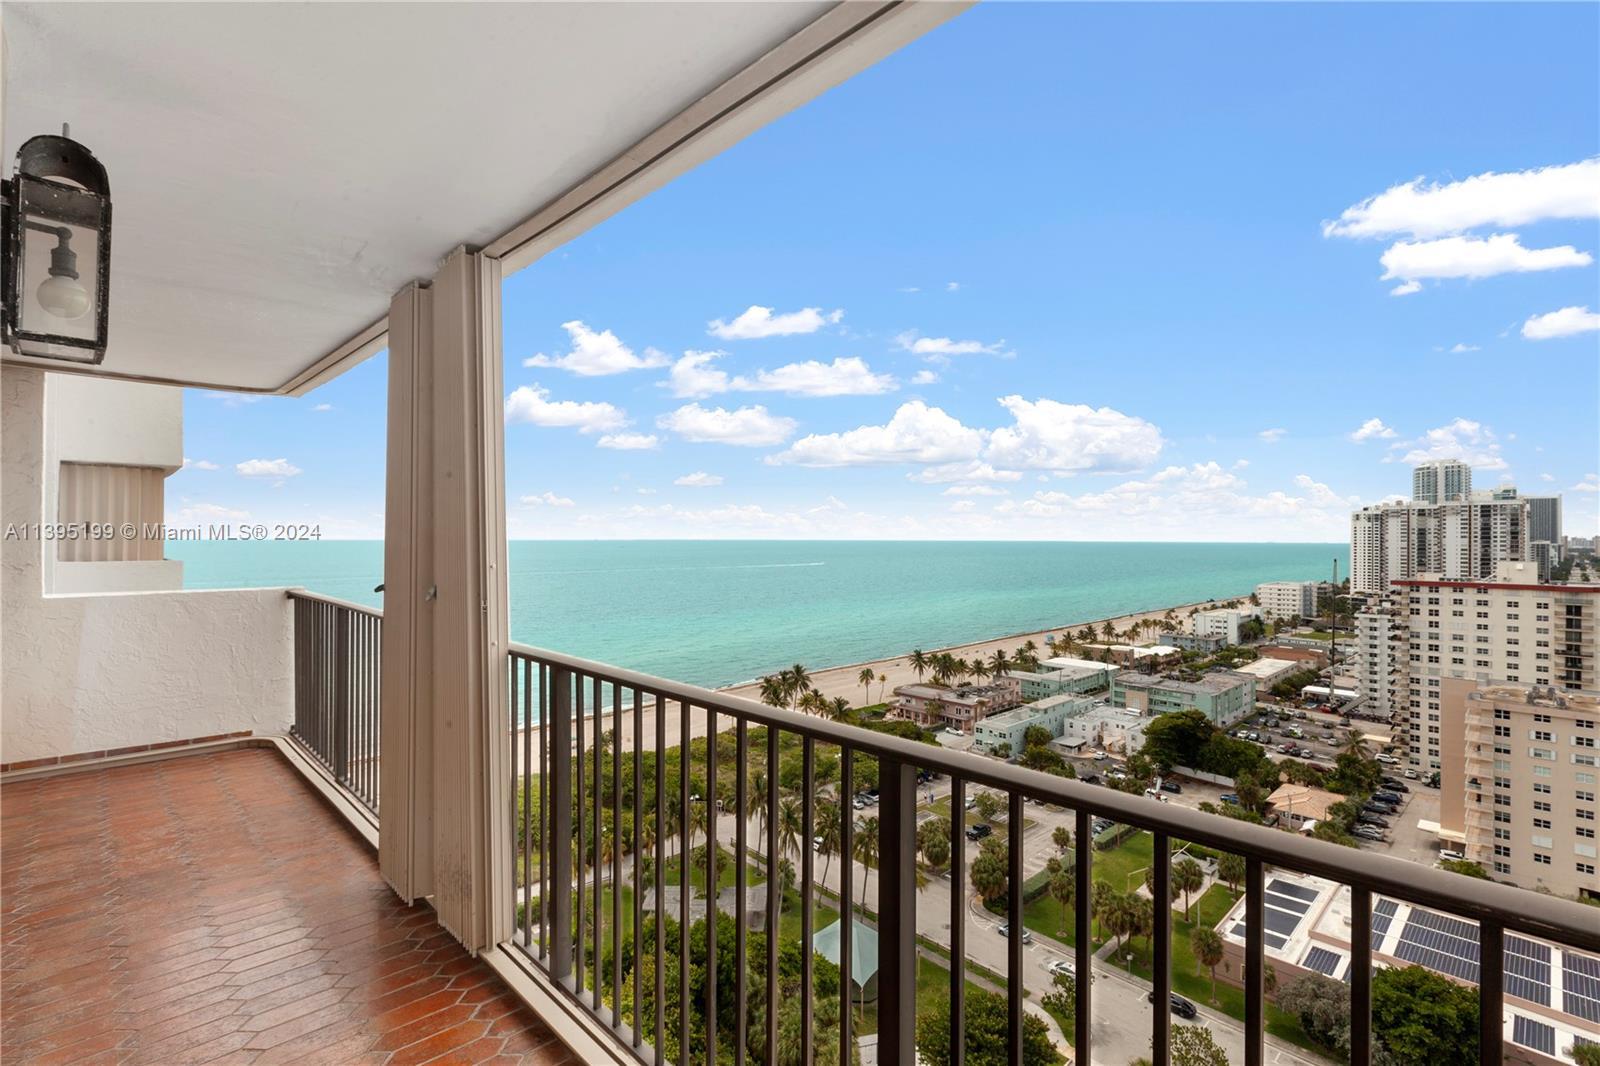 Photo of 1201 S Ocean Dr #2108S in Hollywood, FL